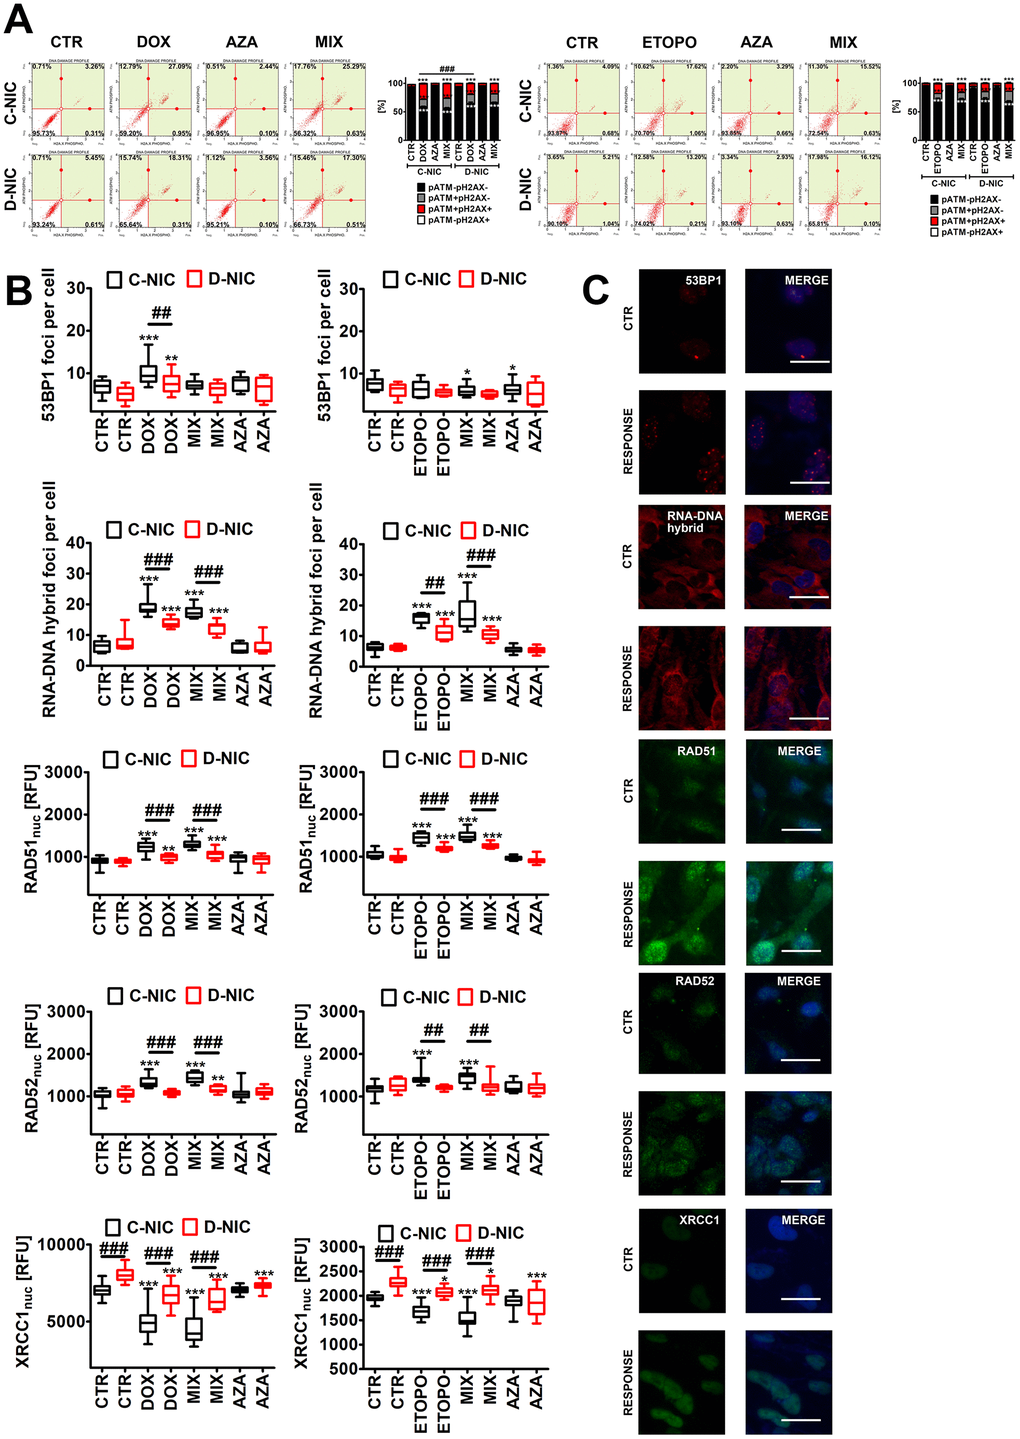 DNMT2/TRDMT1 gene knockout-mediated DNA damage response (DDR) in U-251 MG glioblastoma cells treated with DOX or ETOPO. (A) Activation of ATM and H2AX was evaluated using flow cytometry. Representative dot plots are shown. Bars indicate SD, n = 3, ***p a posteriori test), ###p a posteriori test). (B, C) 53BP1 foci, RNA-DNA hybrid foci, RAD51, RAD52 and XRCC1 immunostaining (red or green). The levels of RAD51, RAD52 and XRCC1 are expressed as relative fluorescence units (RFU). Representative microphotographs are shown, objective 20x, nucleus staining (blue), RESPONSE, representative DOX or ETOPO treatment. Box and whisker plots are shown, n = 3, ***p **p *p a posteriori test), ###p ##p a posteriori test). CTR, control conditions; DOX, doxorubicin treatment; ETOPO, etoposide treatment; AZA, azacytidine treatment; MIX, azacytidine post-treatment; C-NIC, control cells with unmodified levels of DNMT2/TRDMT1 containing control plasmid; D-NIC, cells with DNMT2/TRDMT1 gene knockout containing dedicated DNMT2 double nickase plasmid.